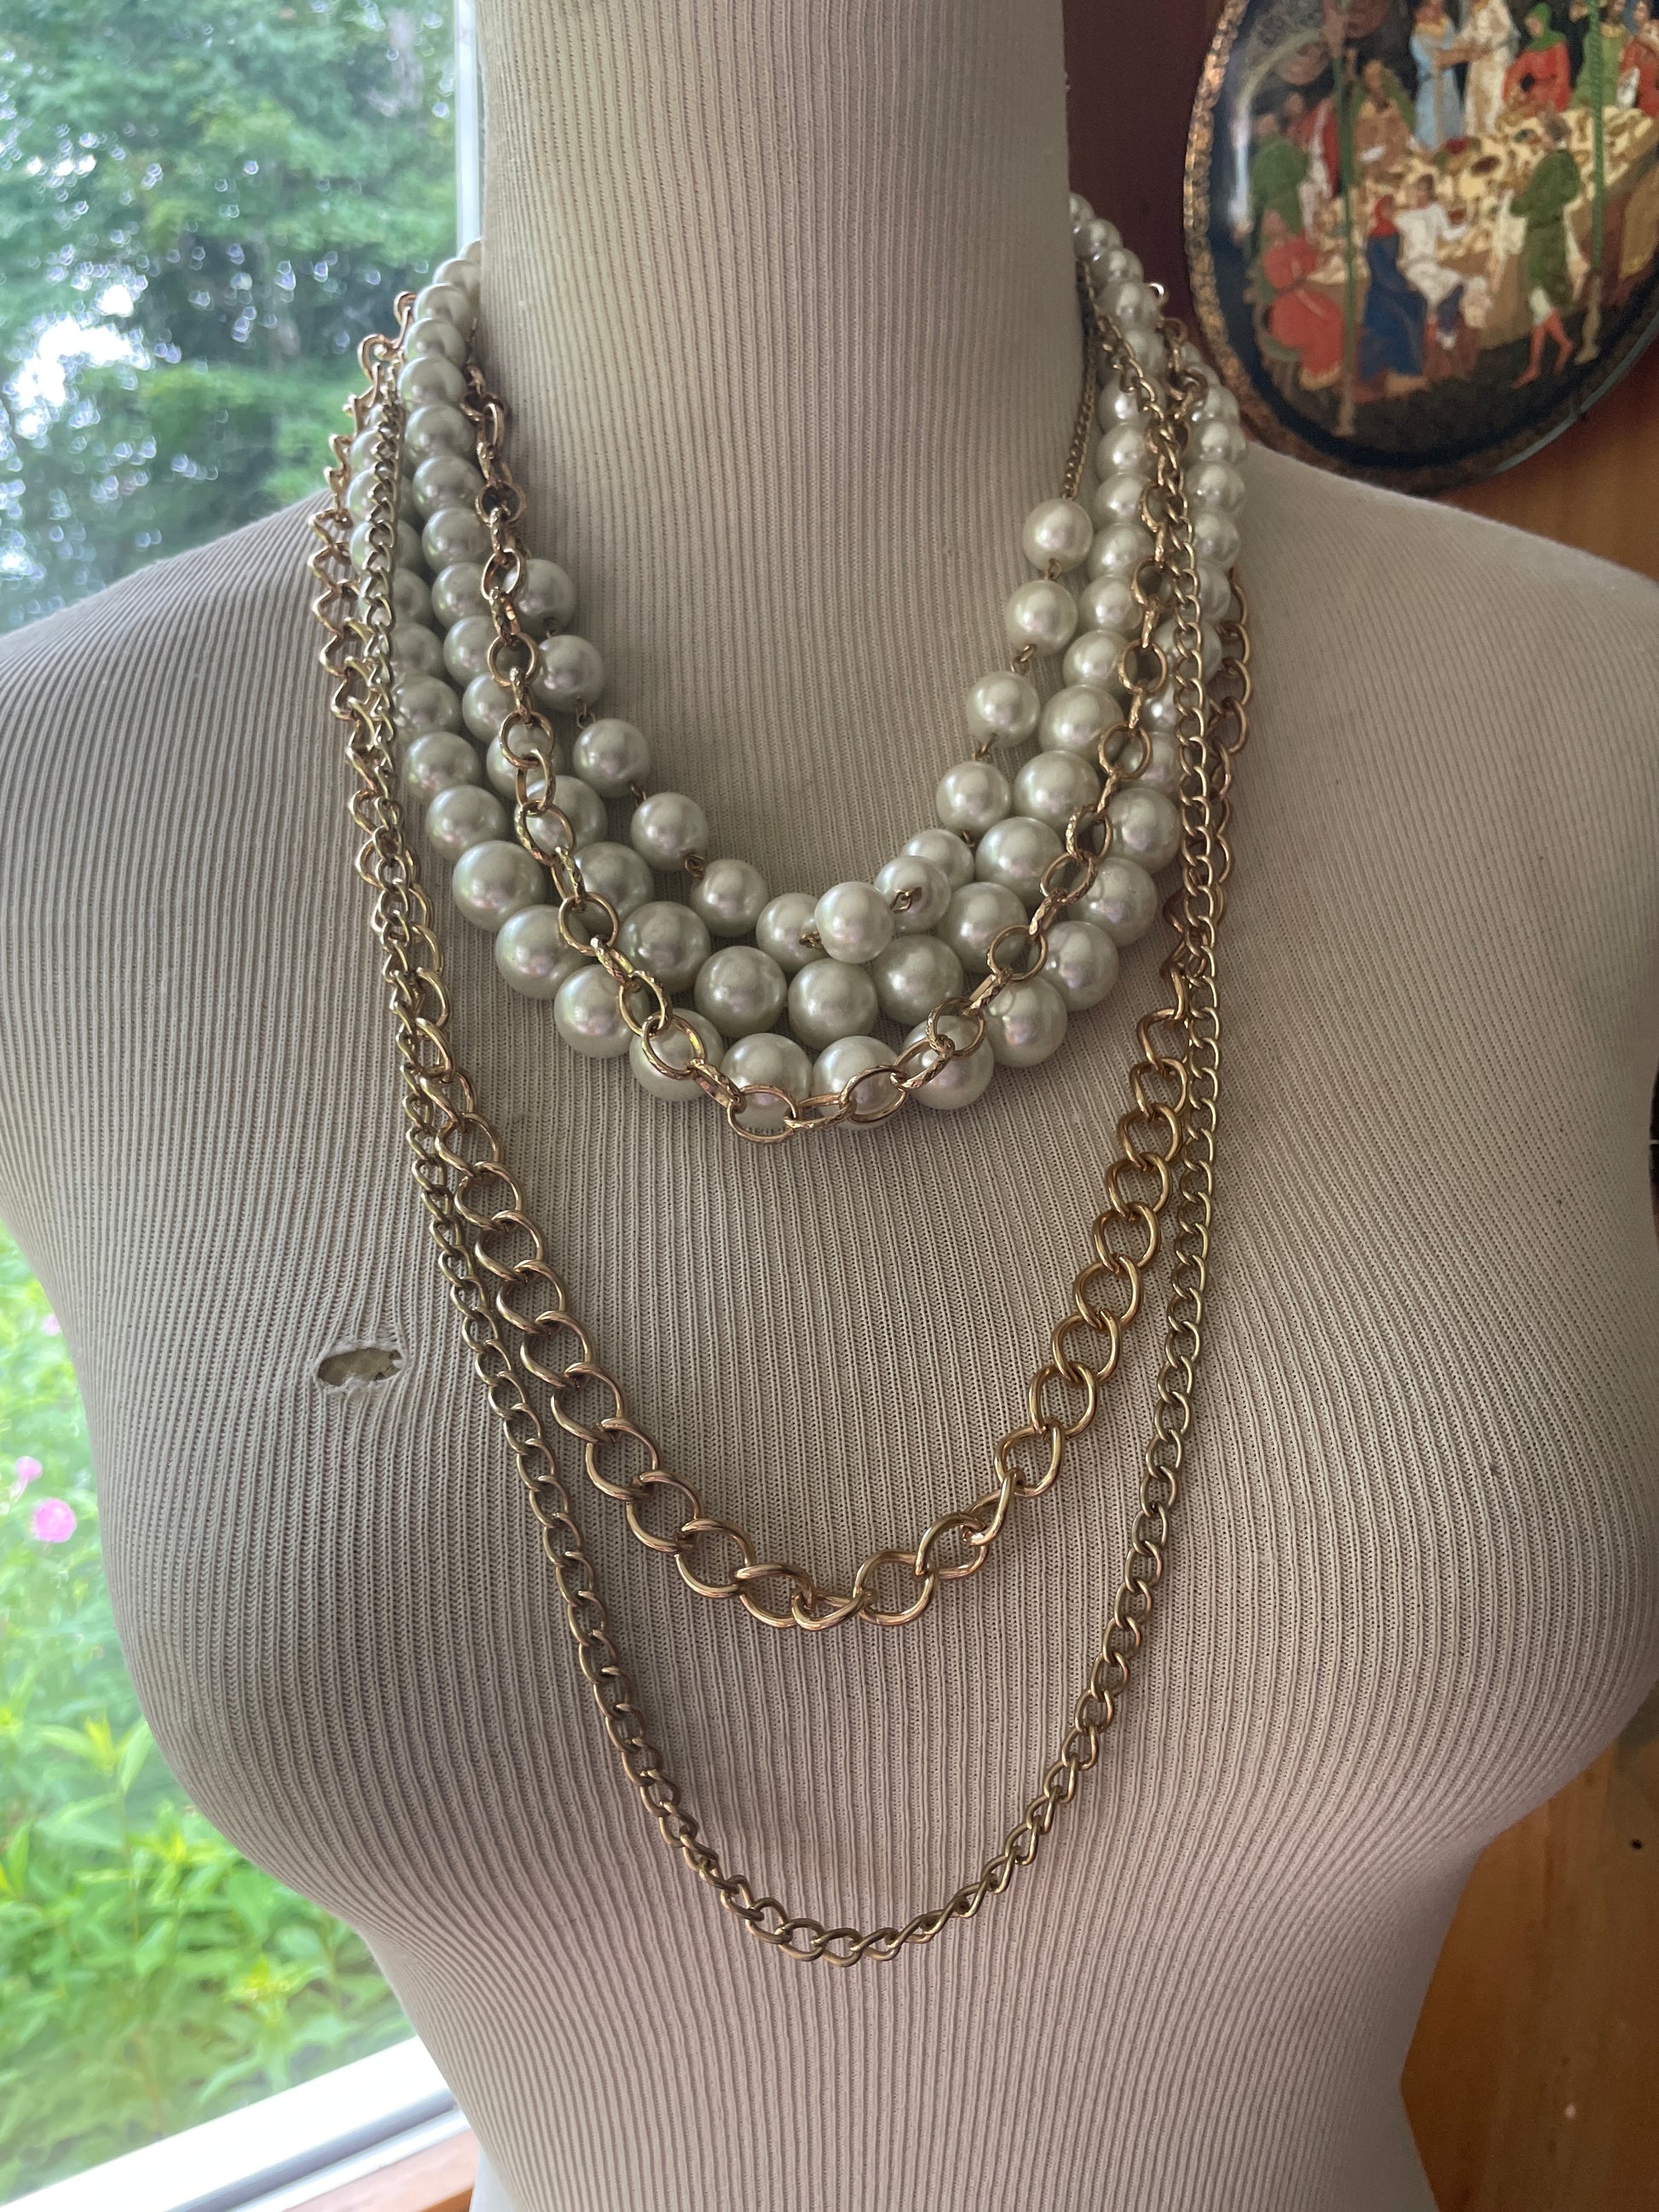  2000s Draped Gold Tone Chains Faux Pearl Costume Necklace